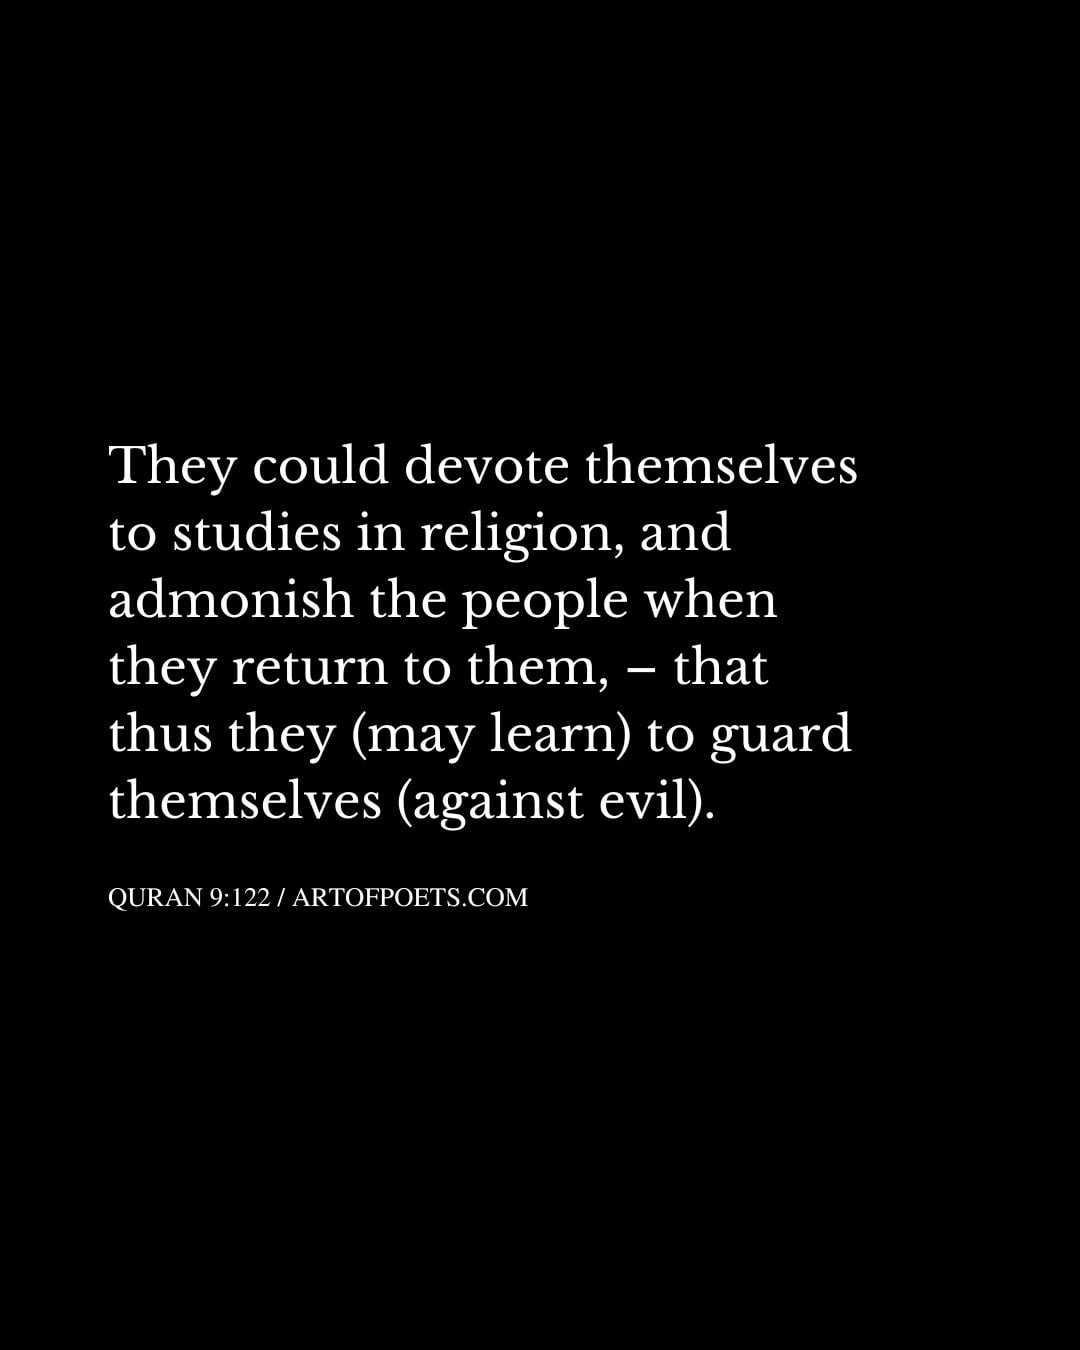 They could devote themselves to studies in religion and admonish the people when they return to them